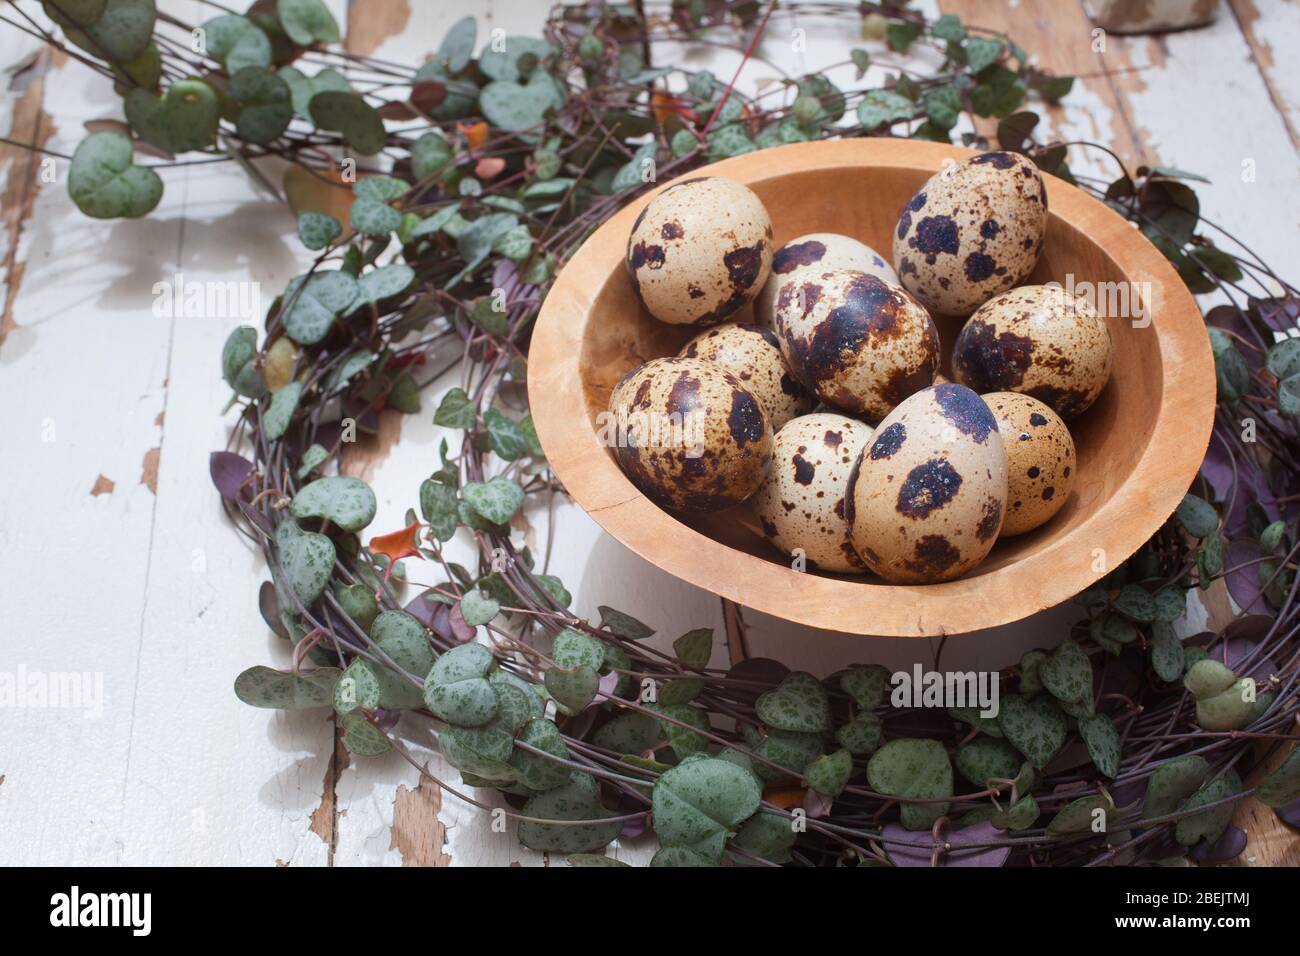 Quails eggs in a wooden bowl against in a nest like setting Stock Photo